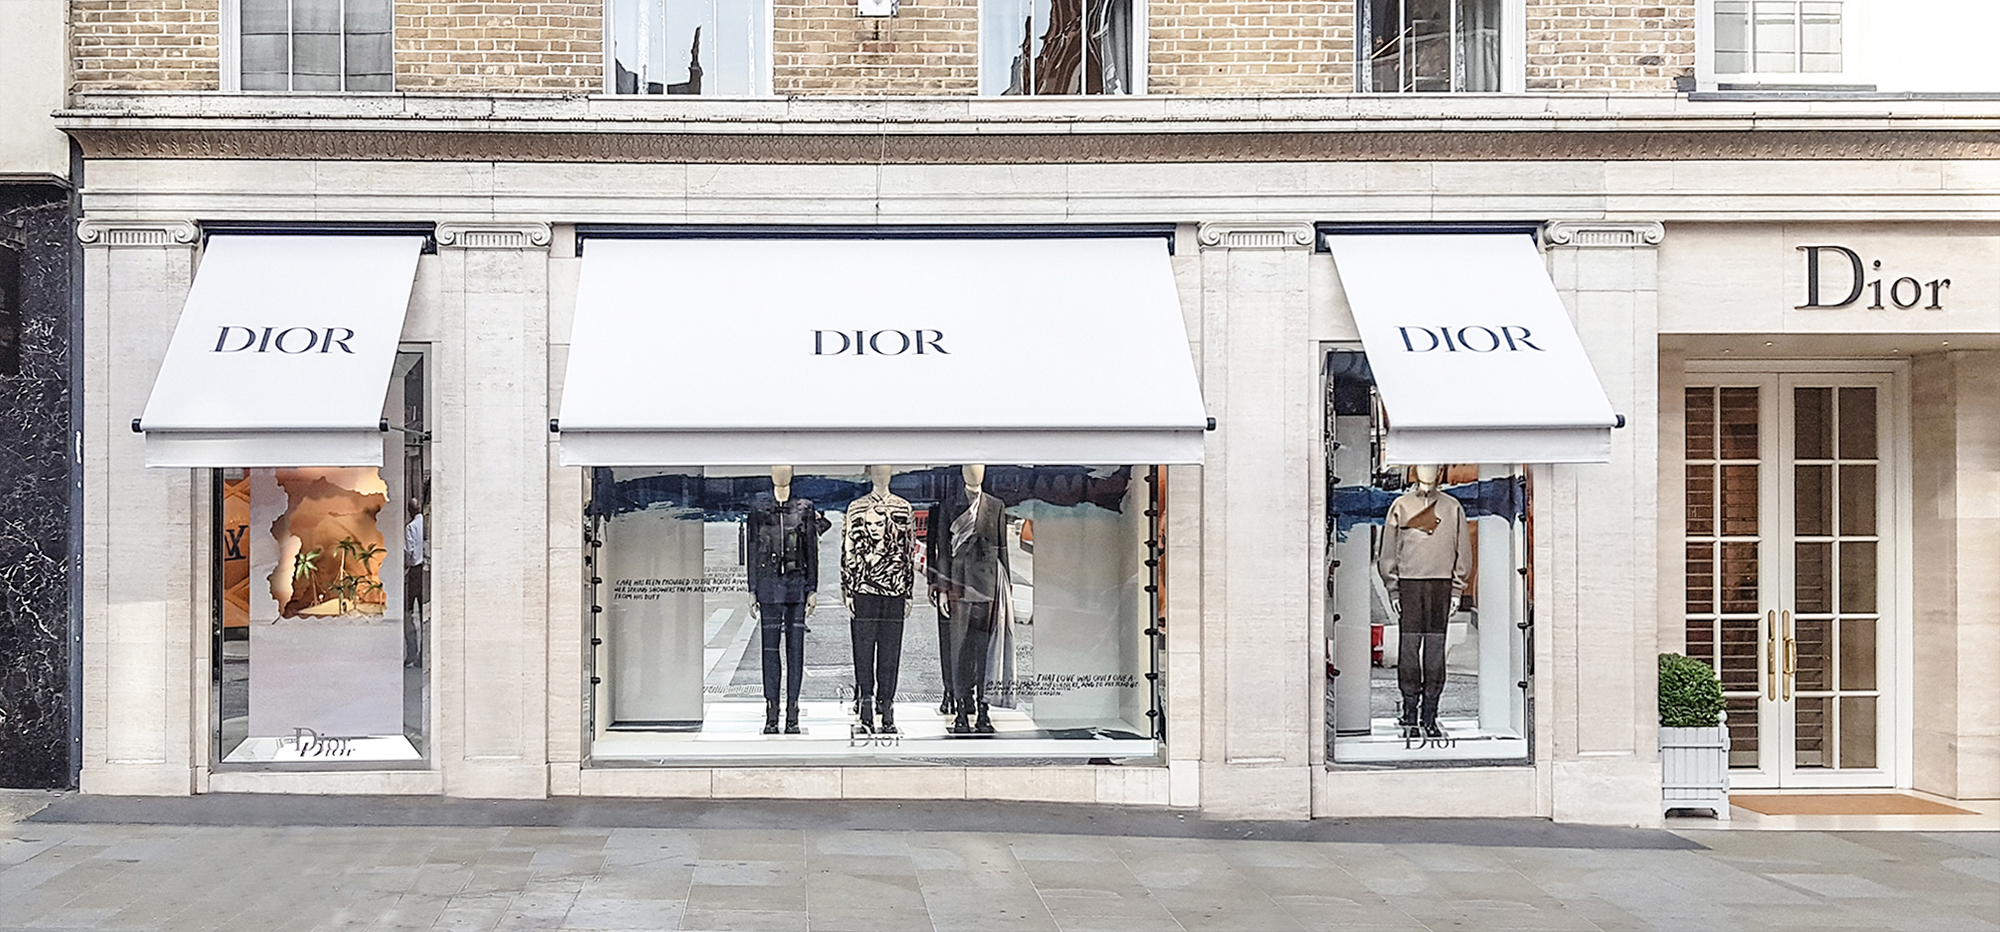 Greenwich awning for DIOR